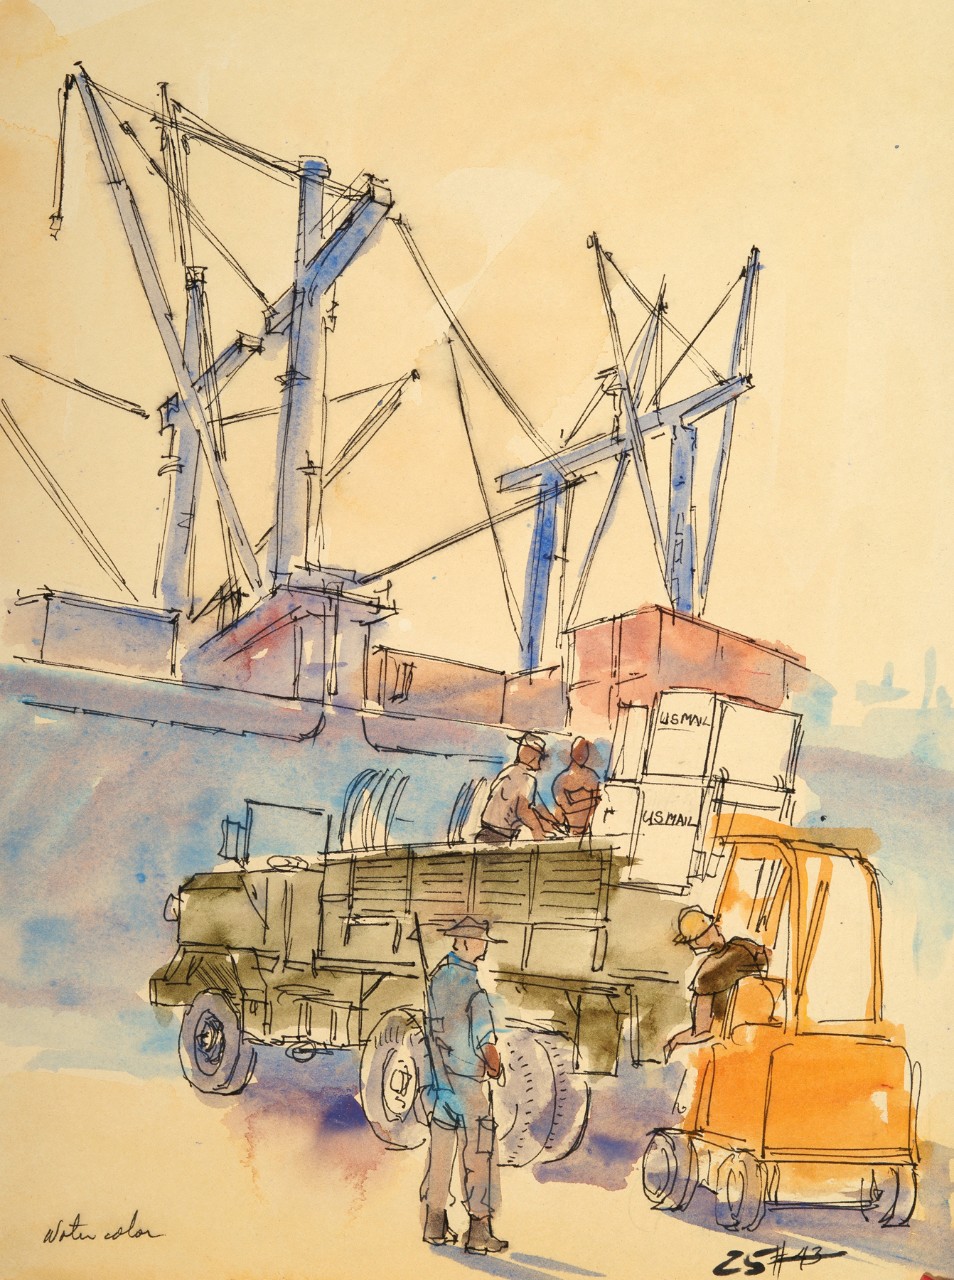 Soldiers load crates of mail from a forklift onto a truck, a ship is in the background next to the pier